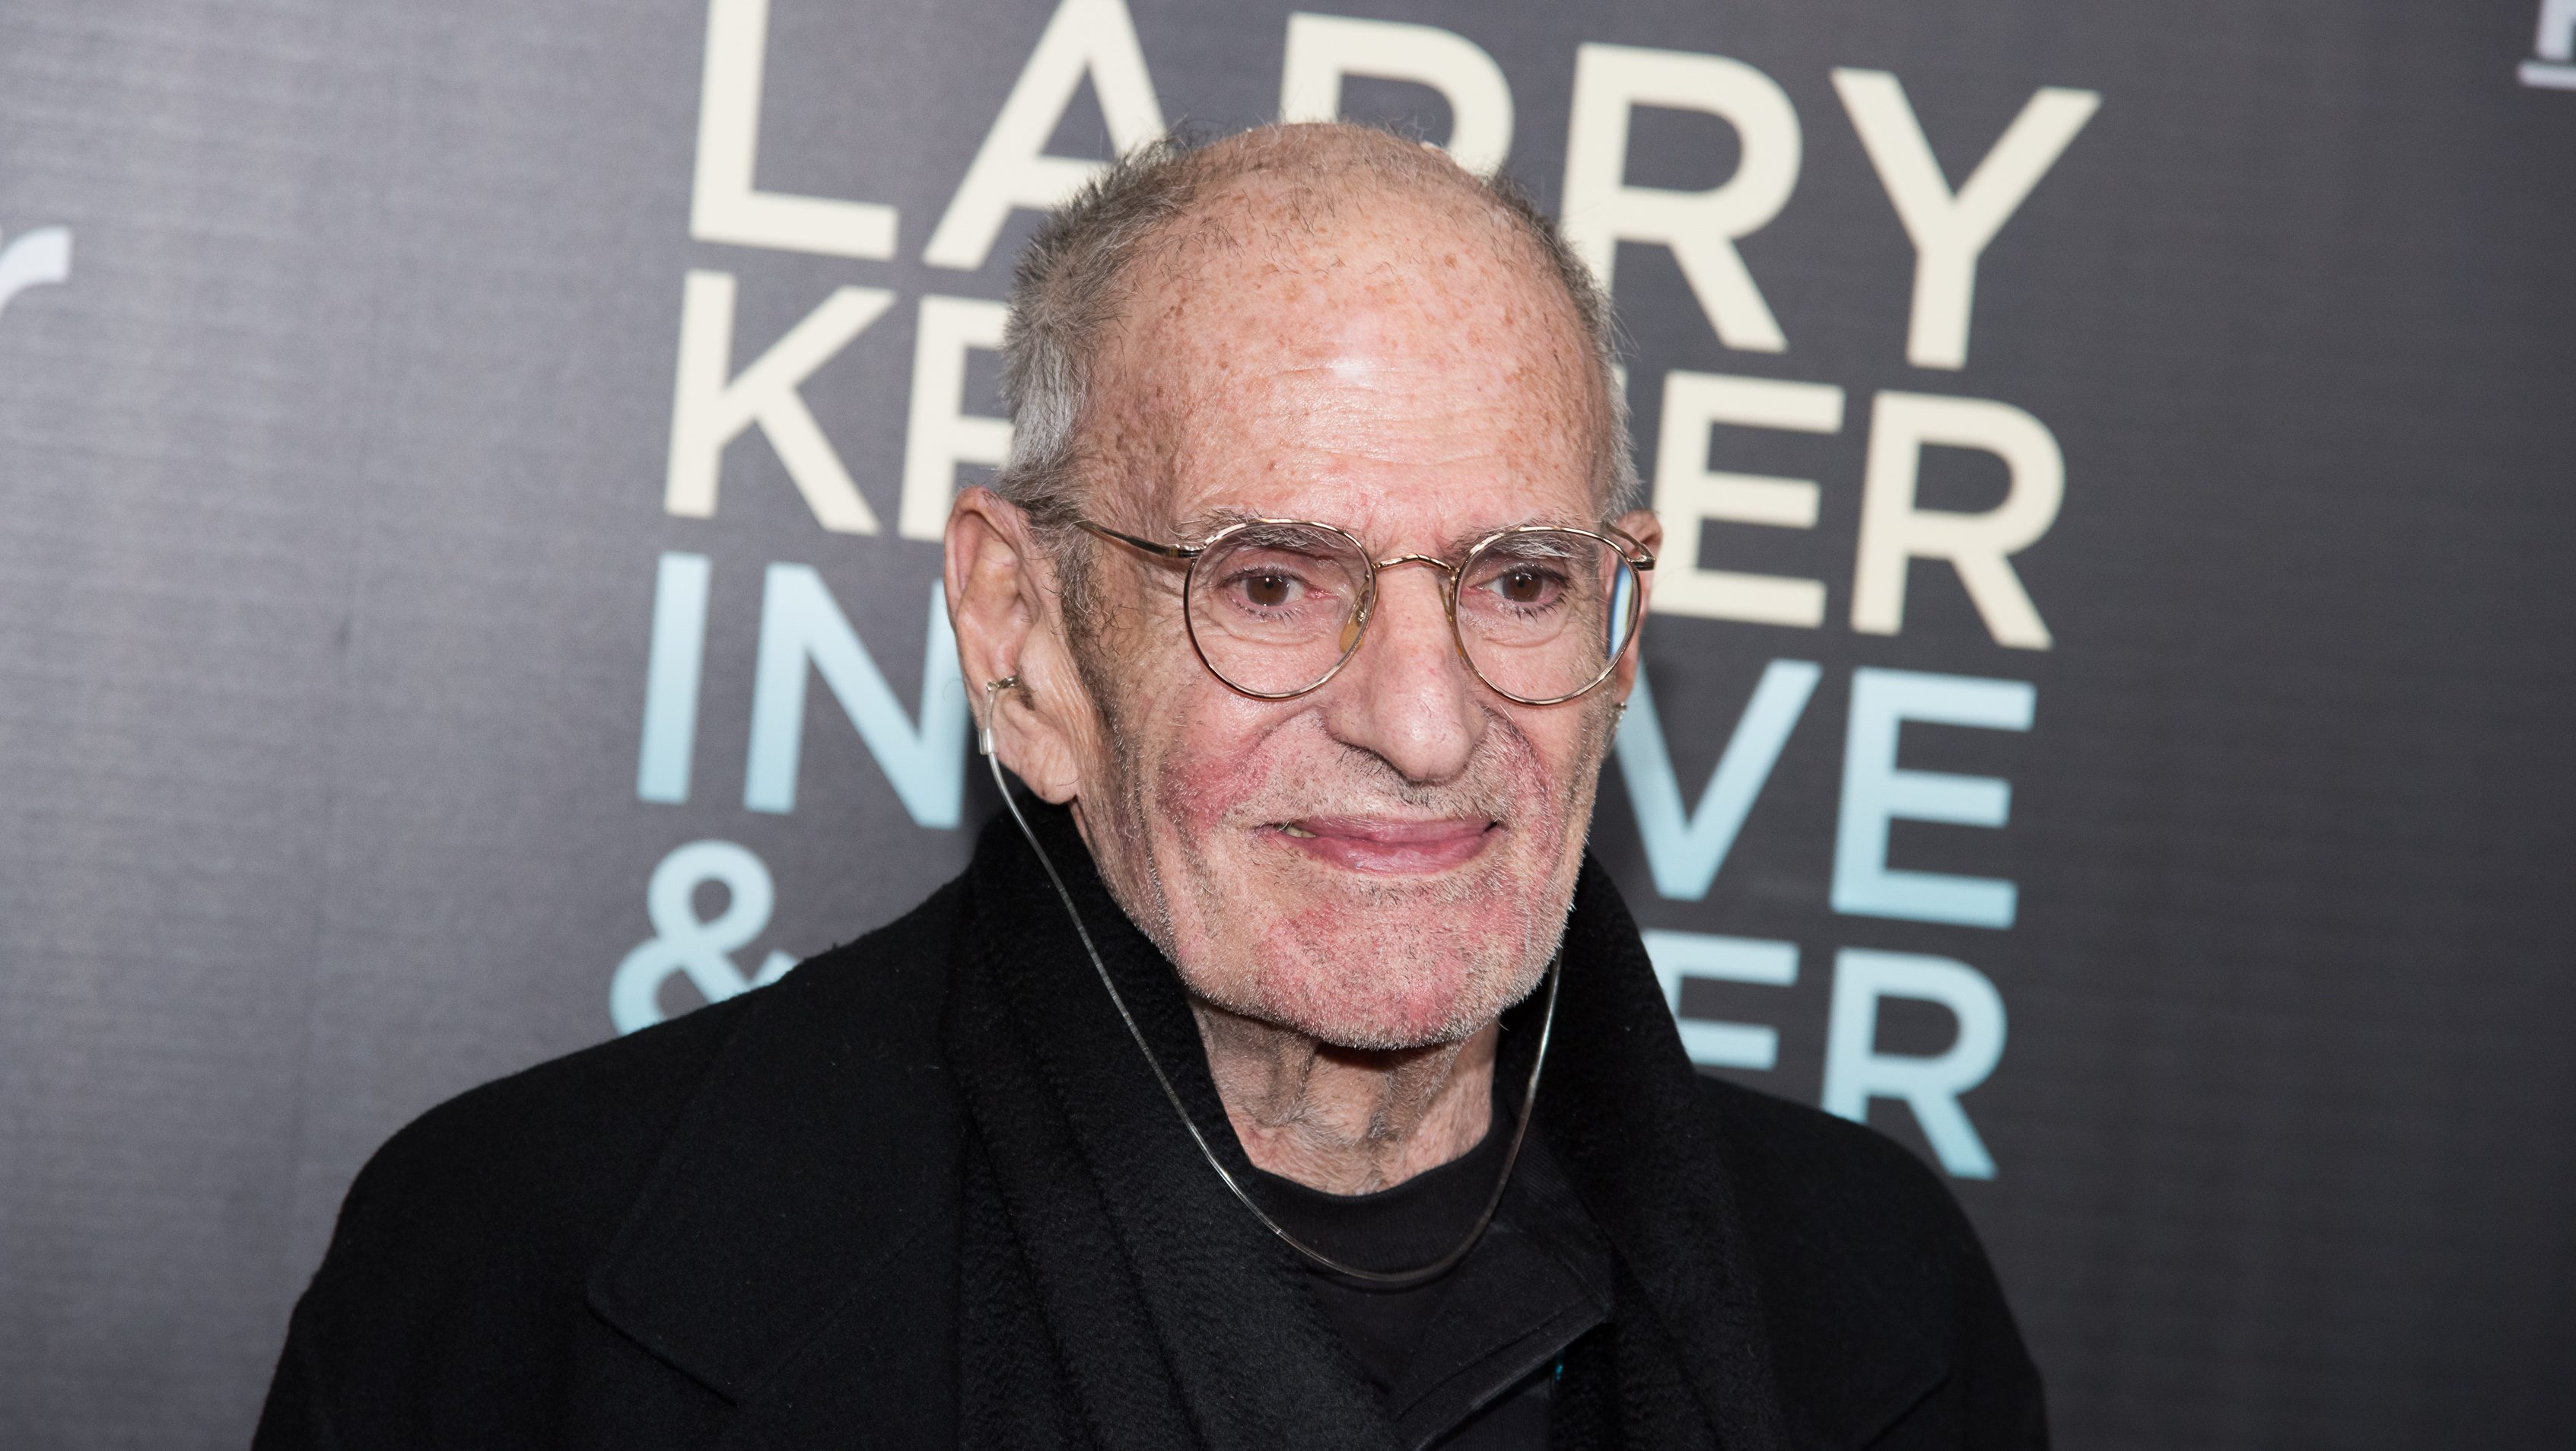 Reports from the Holocaust by Larry Kramer